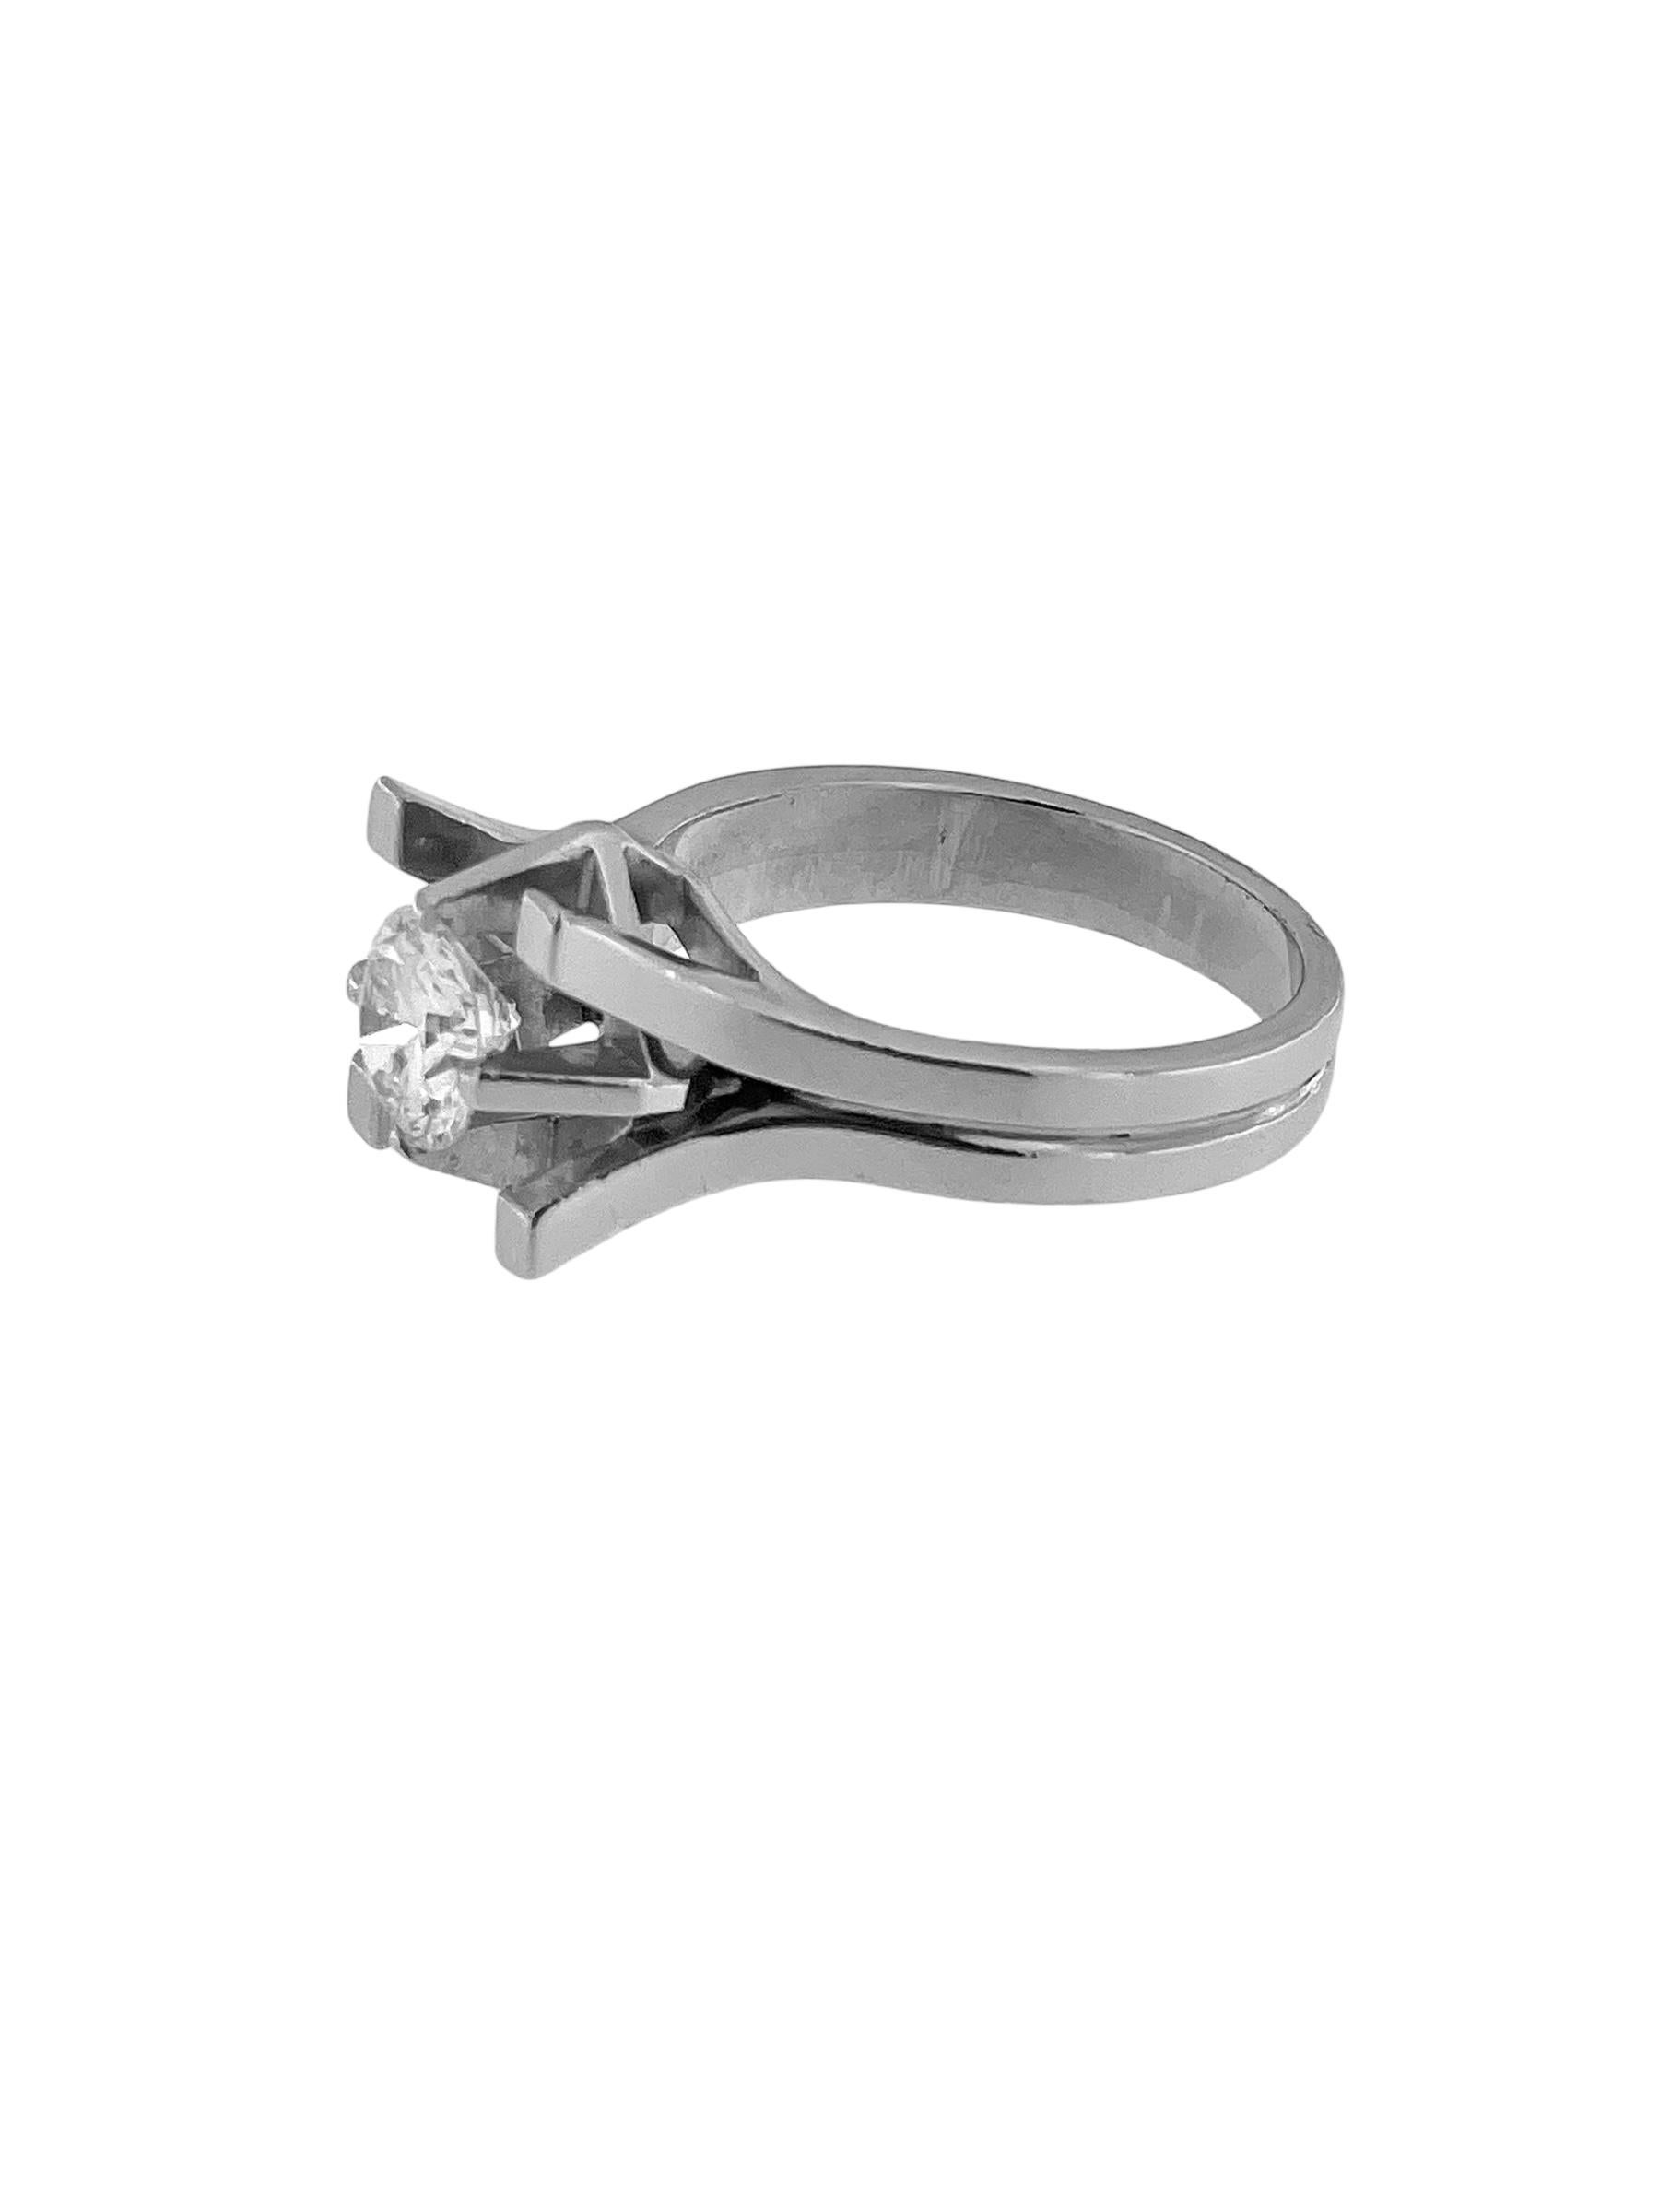 HRD Certified Palladium and Diamond Solitaire Ring For Sale 2